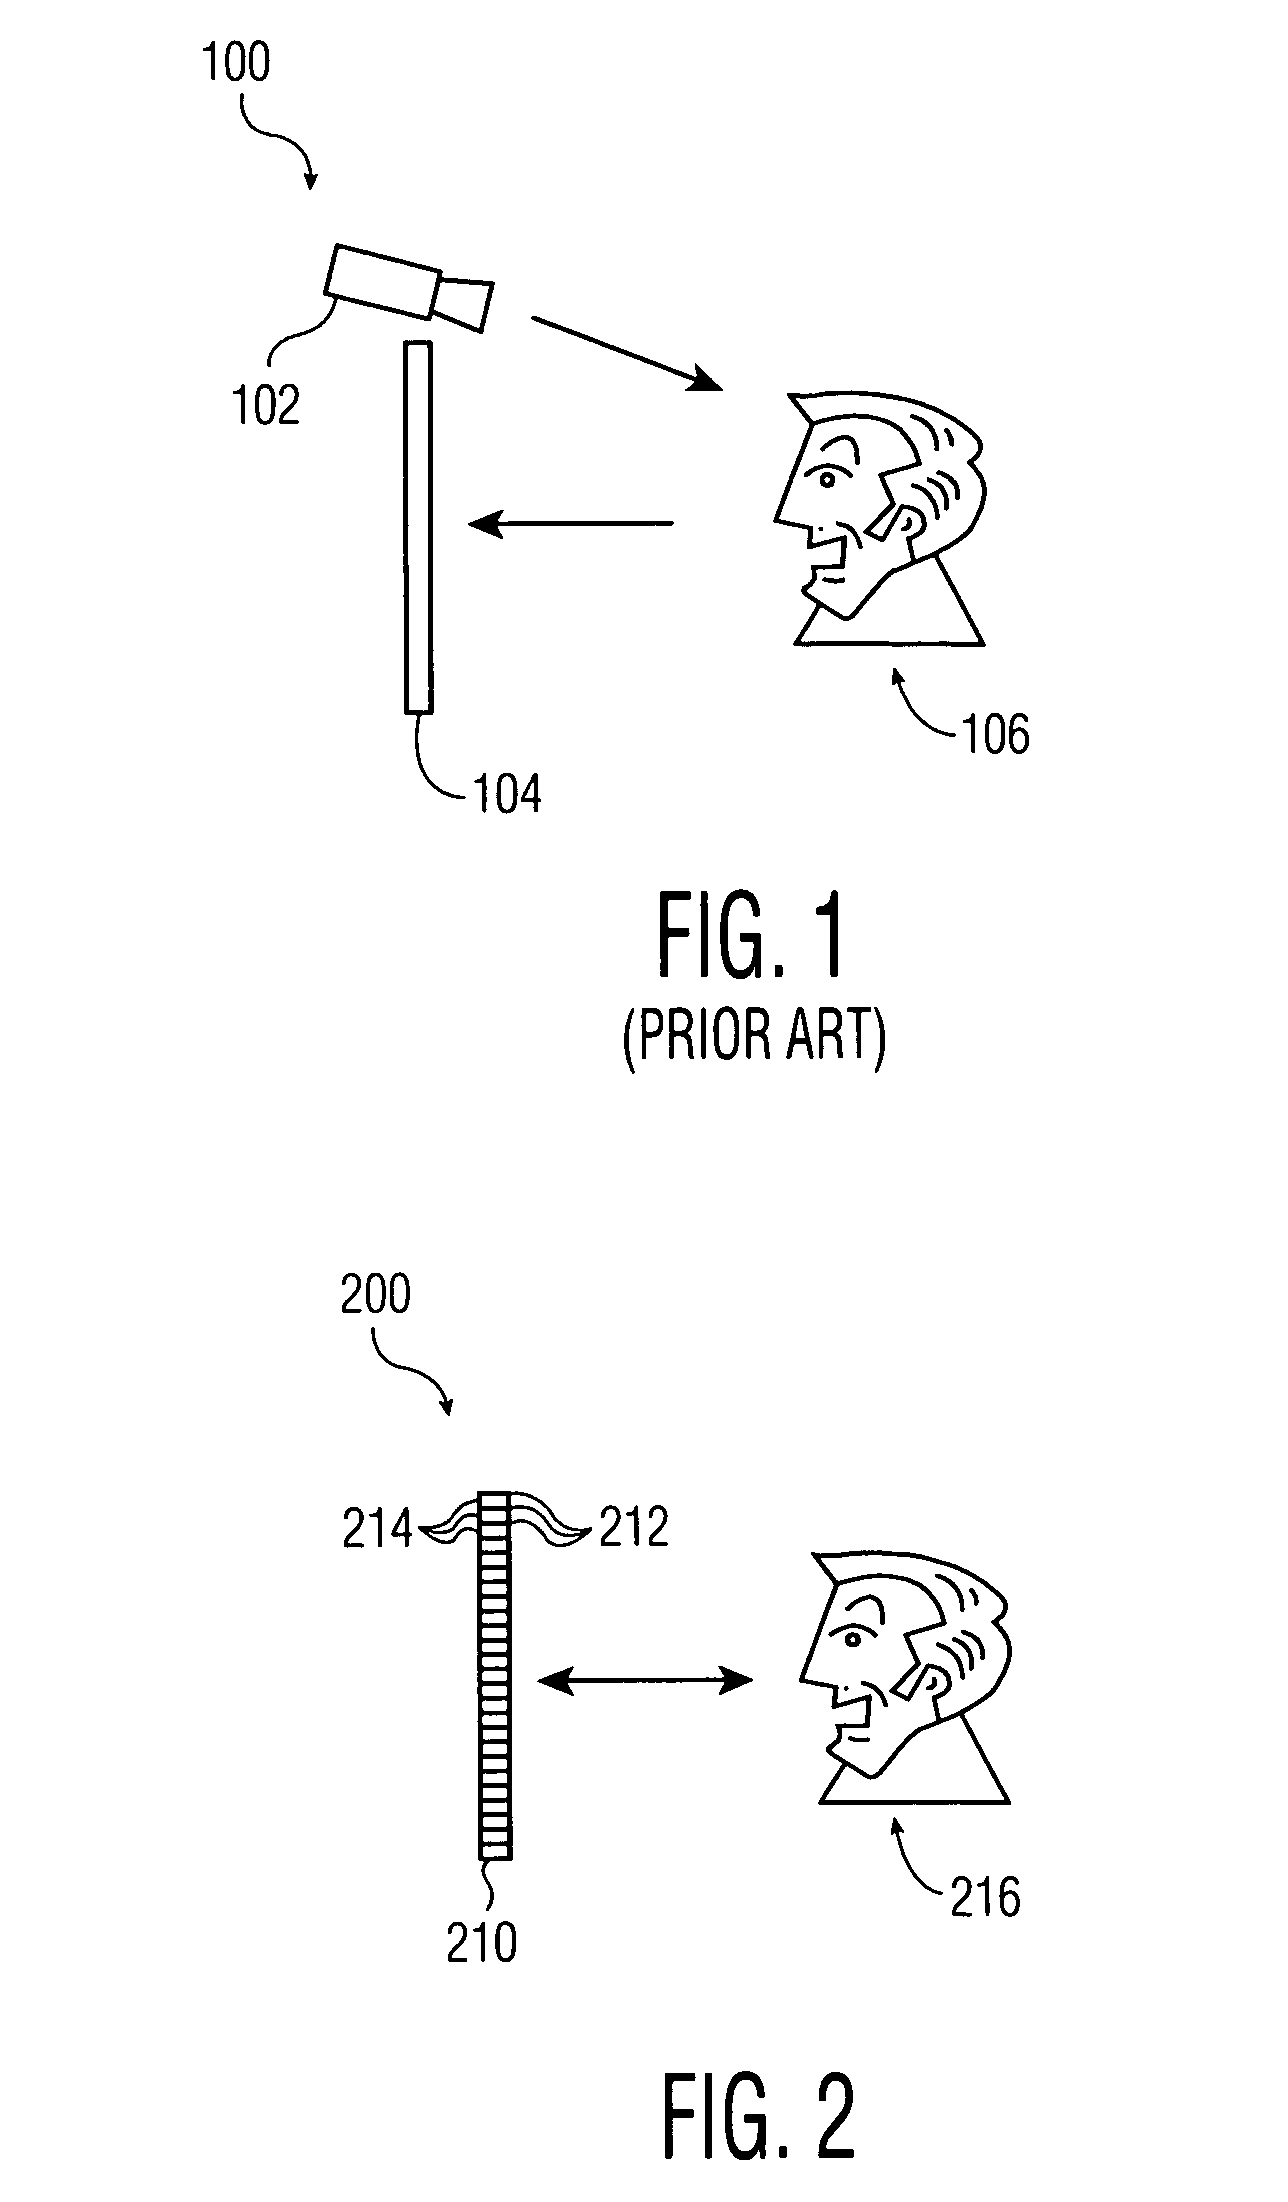 Combined display-camera for an image processing system